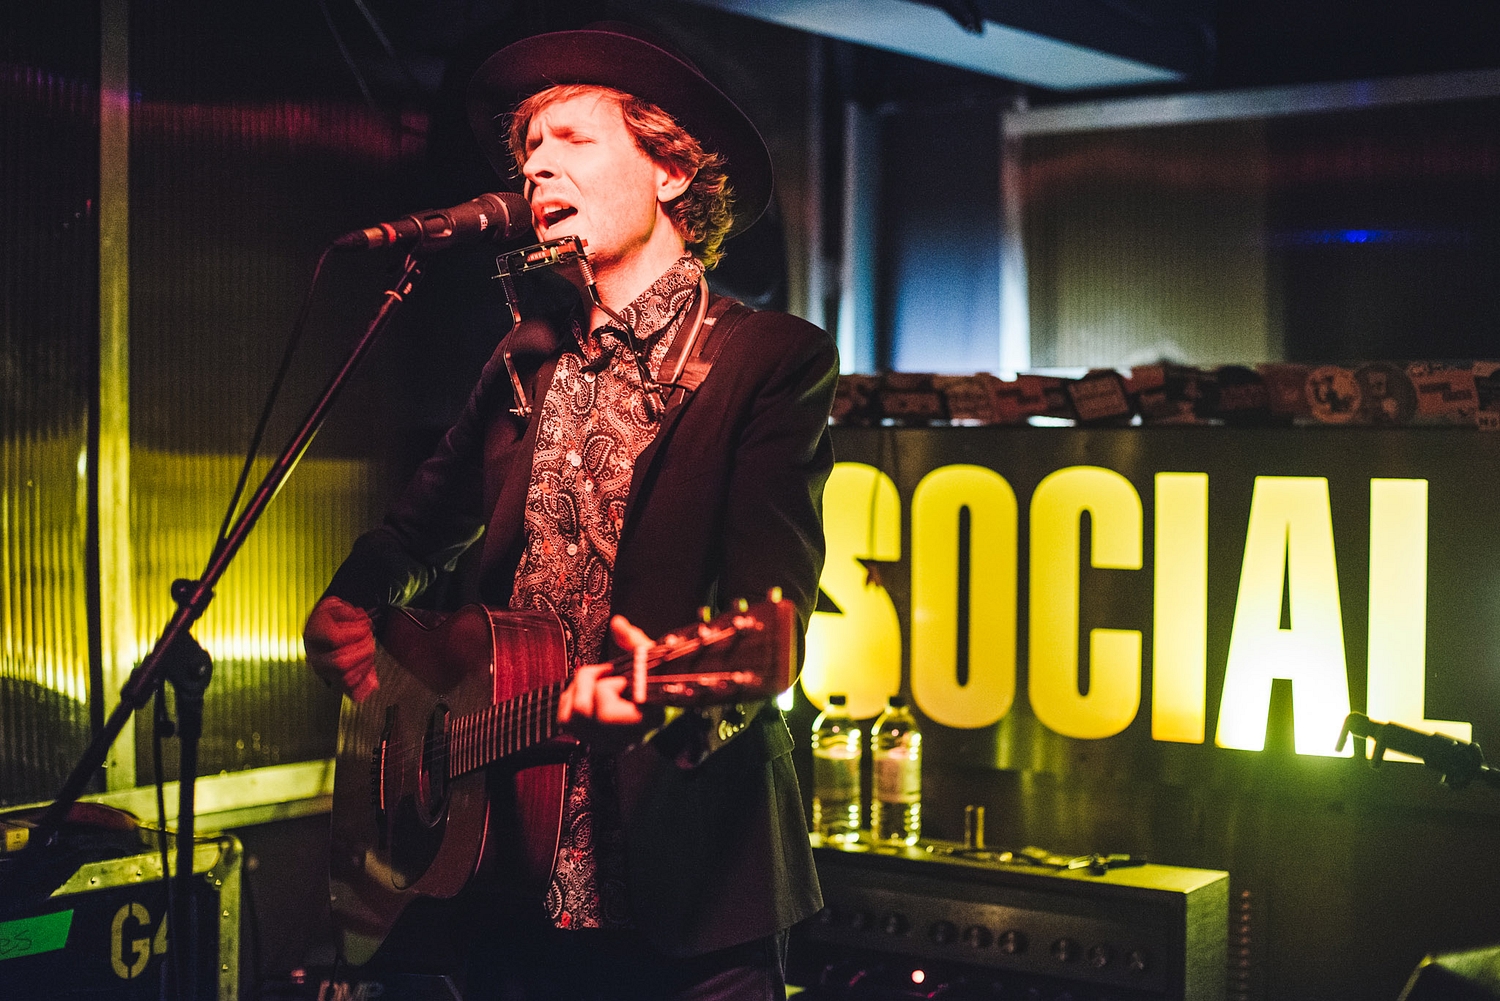 Beck surprises London with intimate solo gig